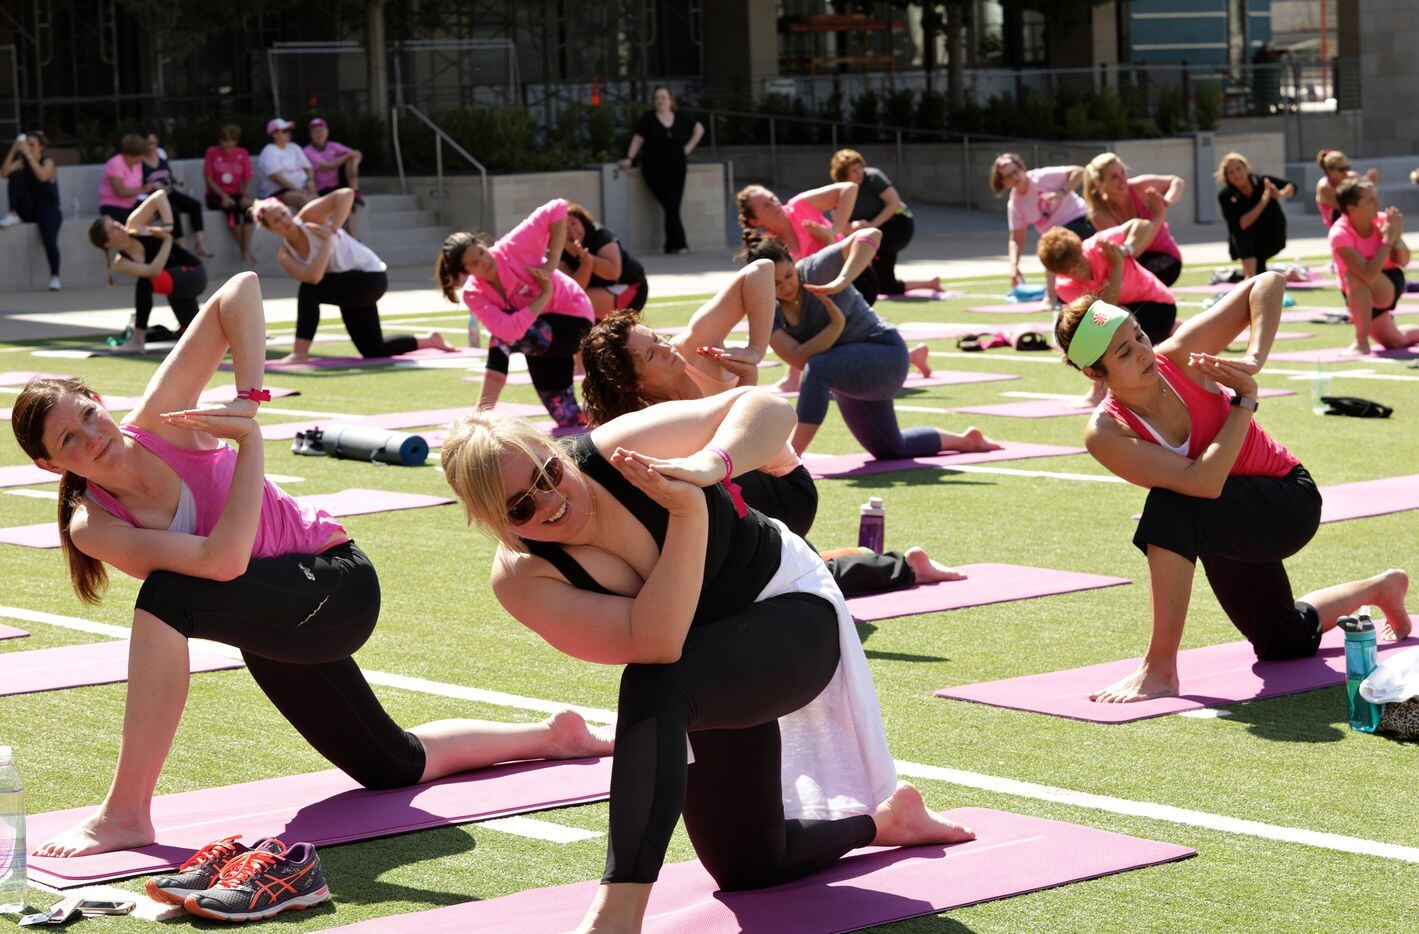 Susan G. Komen supporters participate in project:OM, a cancer research yoga event, held at The Star in Frisco on May 13, 2017.